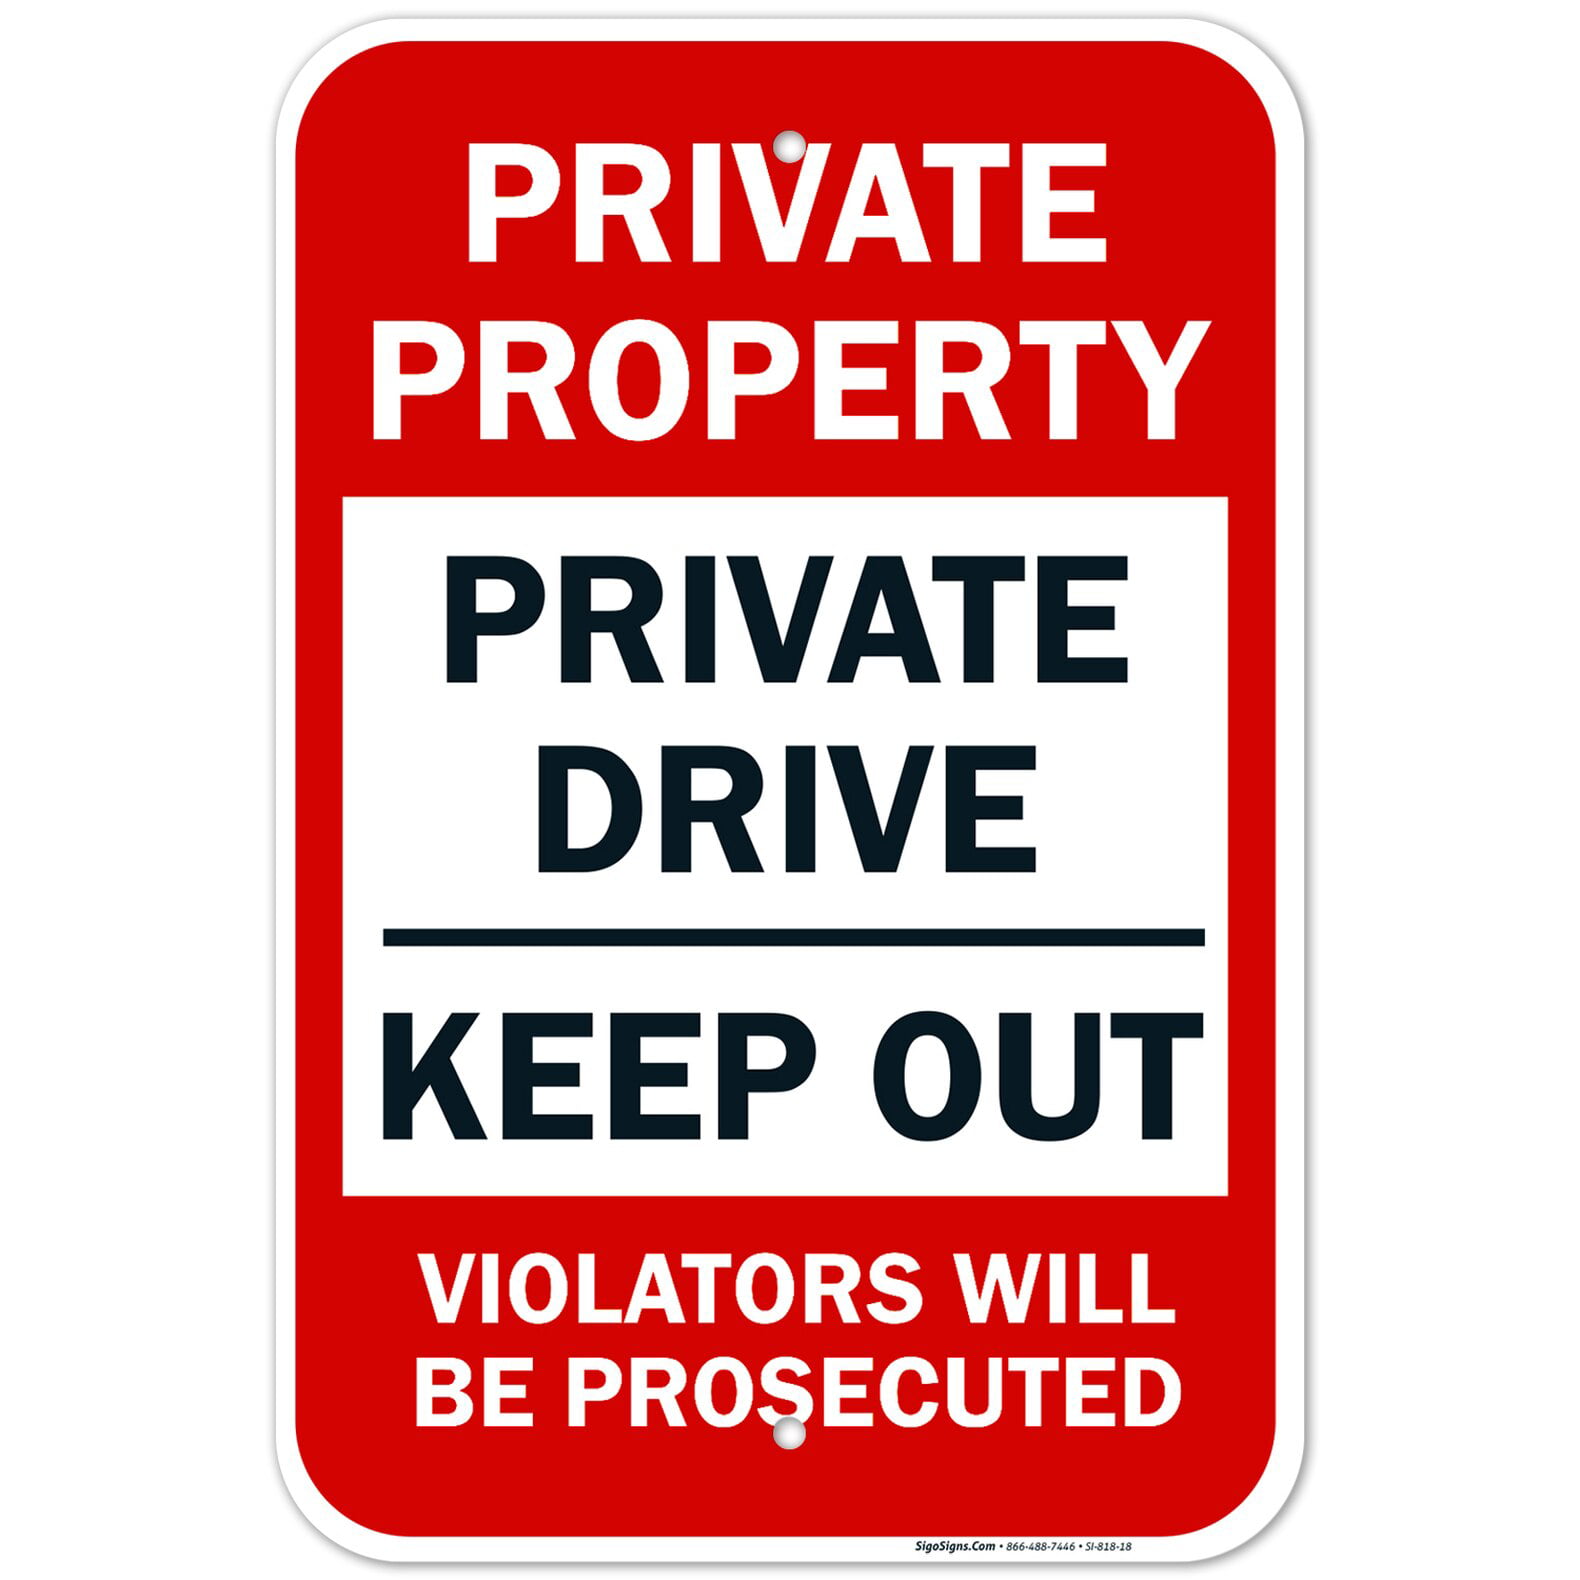 Private Property Keep Out Violators will be prosecuted